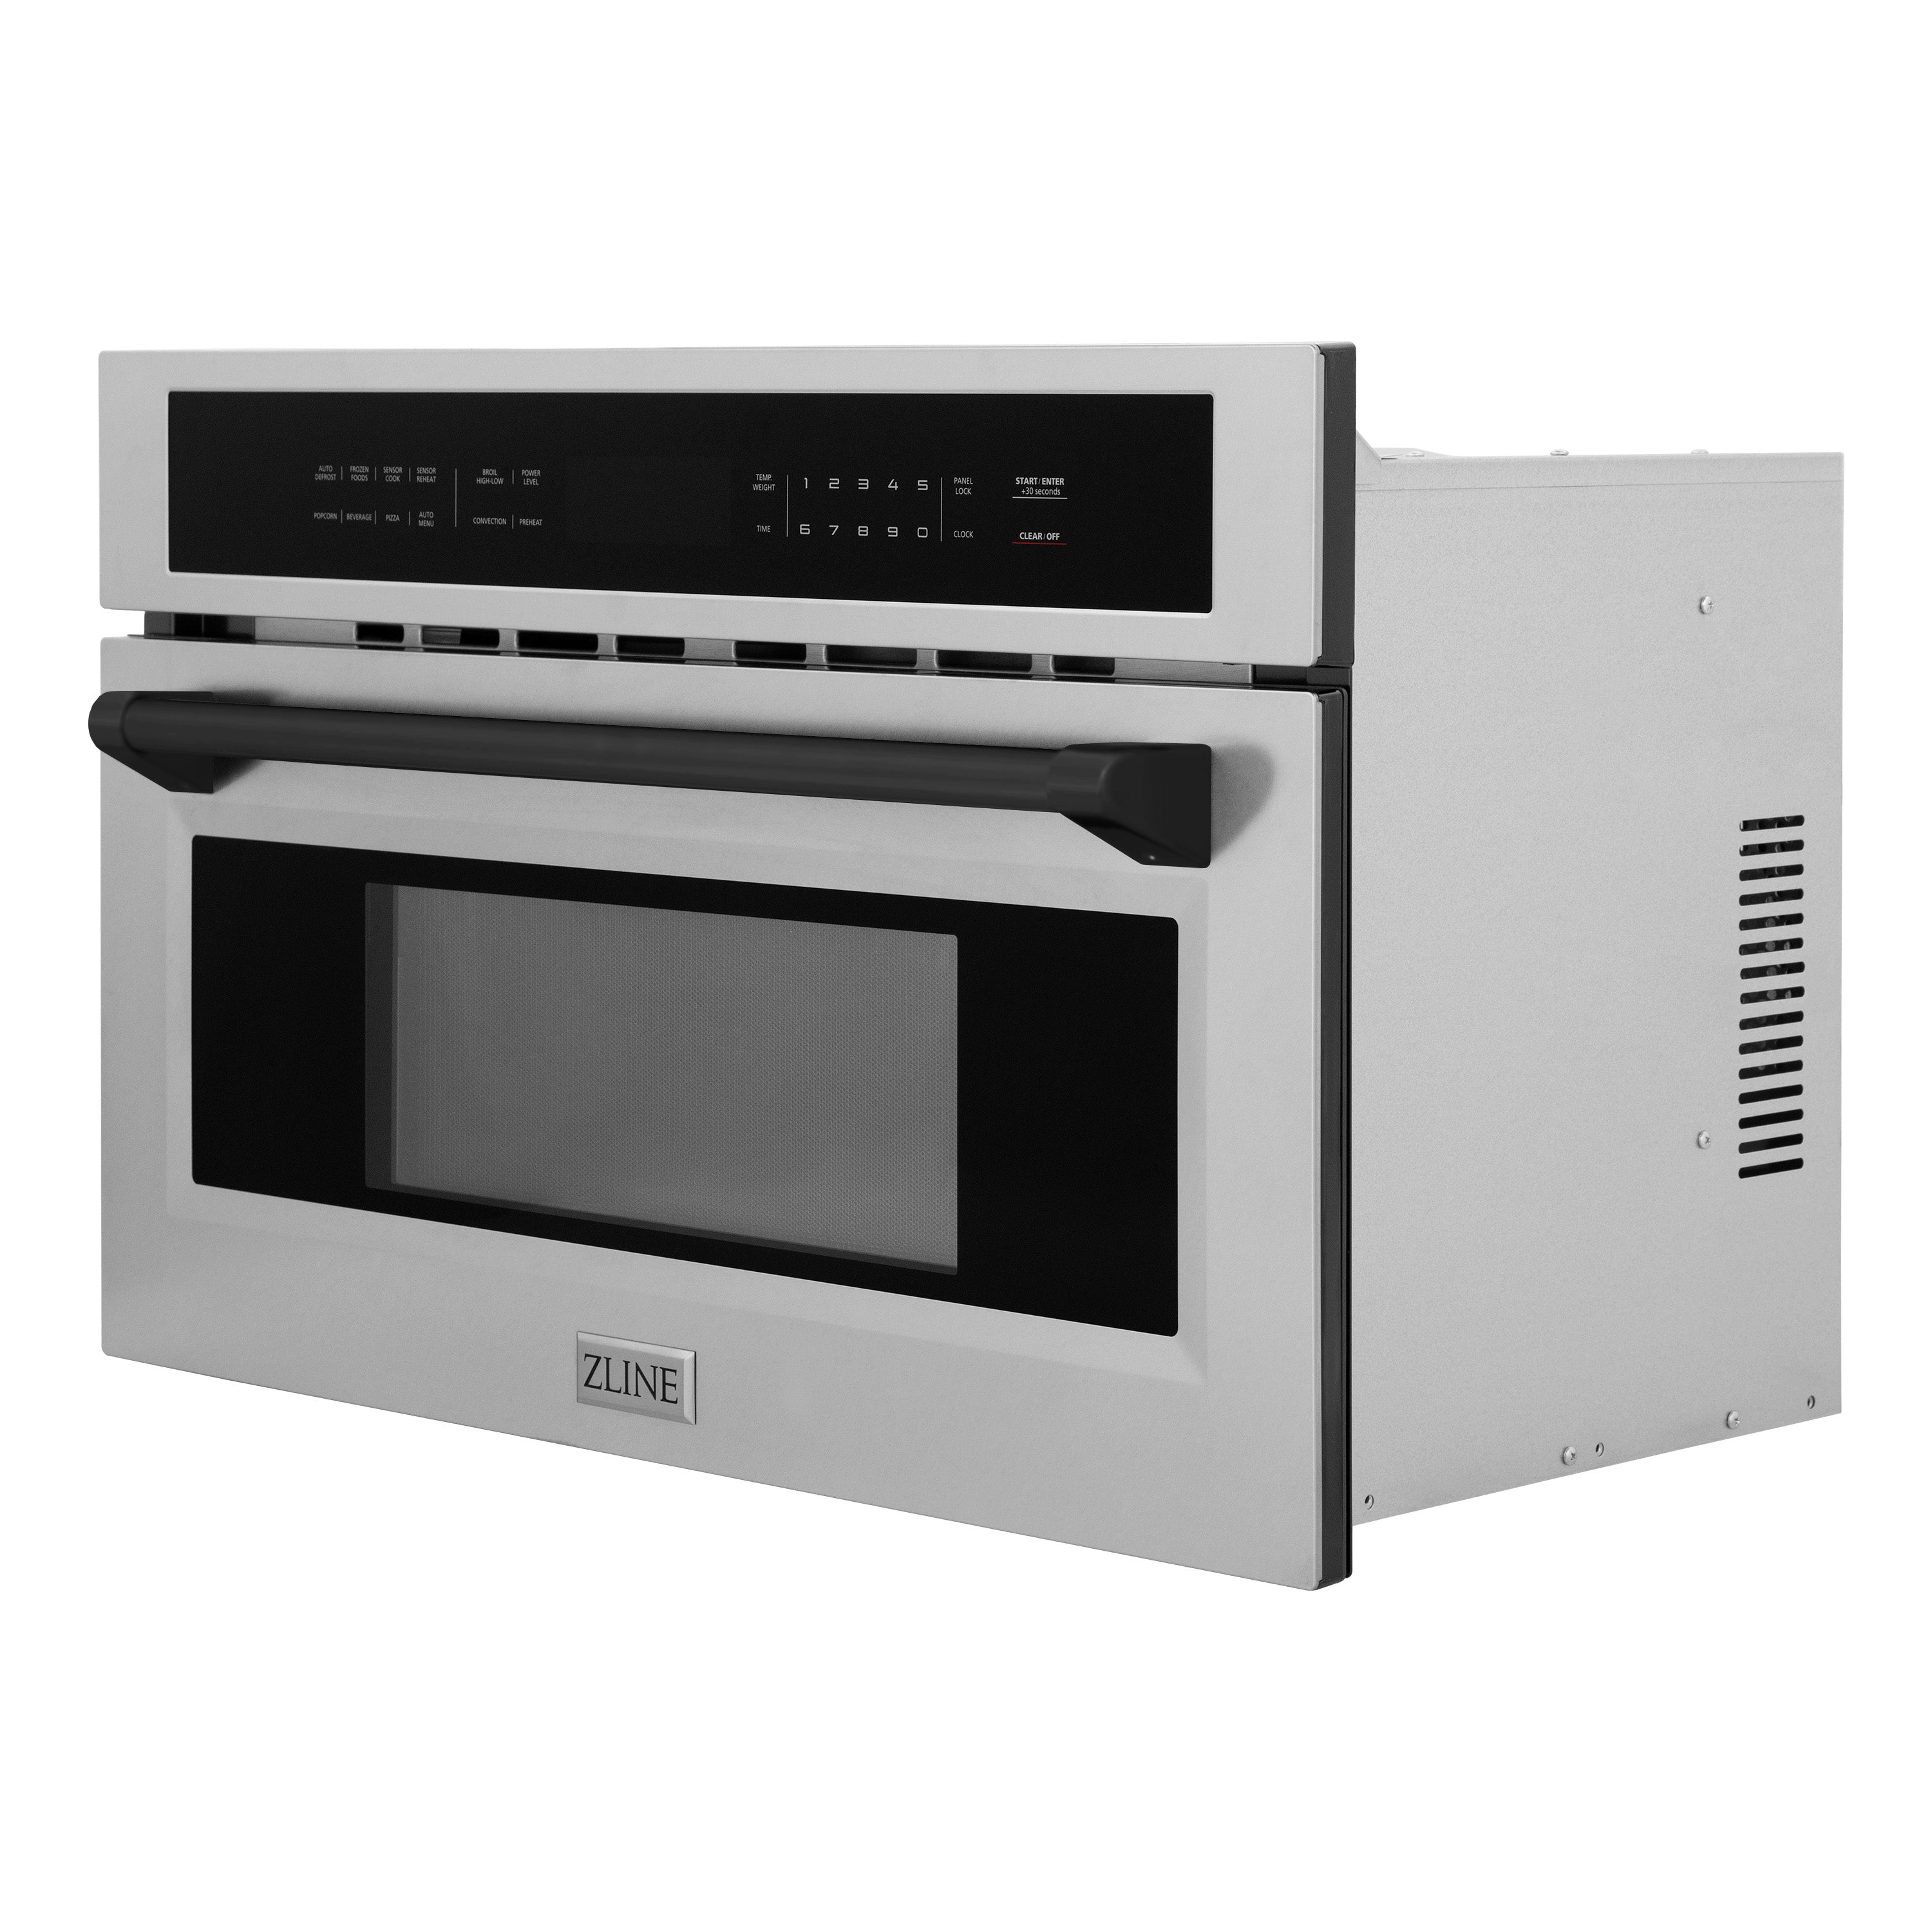 ZLINE Autograph Edition 30 in. 1.6 cu ft. Built-in Convection Microwave Oven in Stainless Steel with Matte Black Accents (MWOZ-30-MB) Side View Door Closed